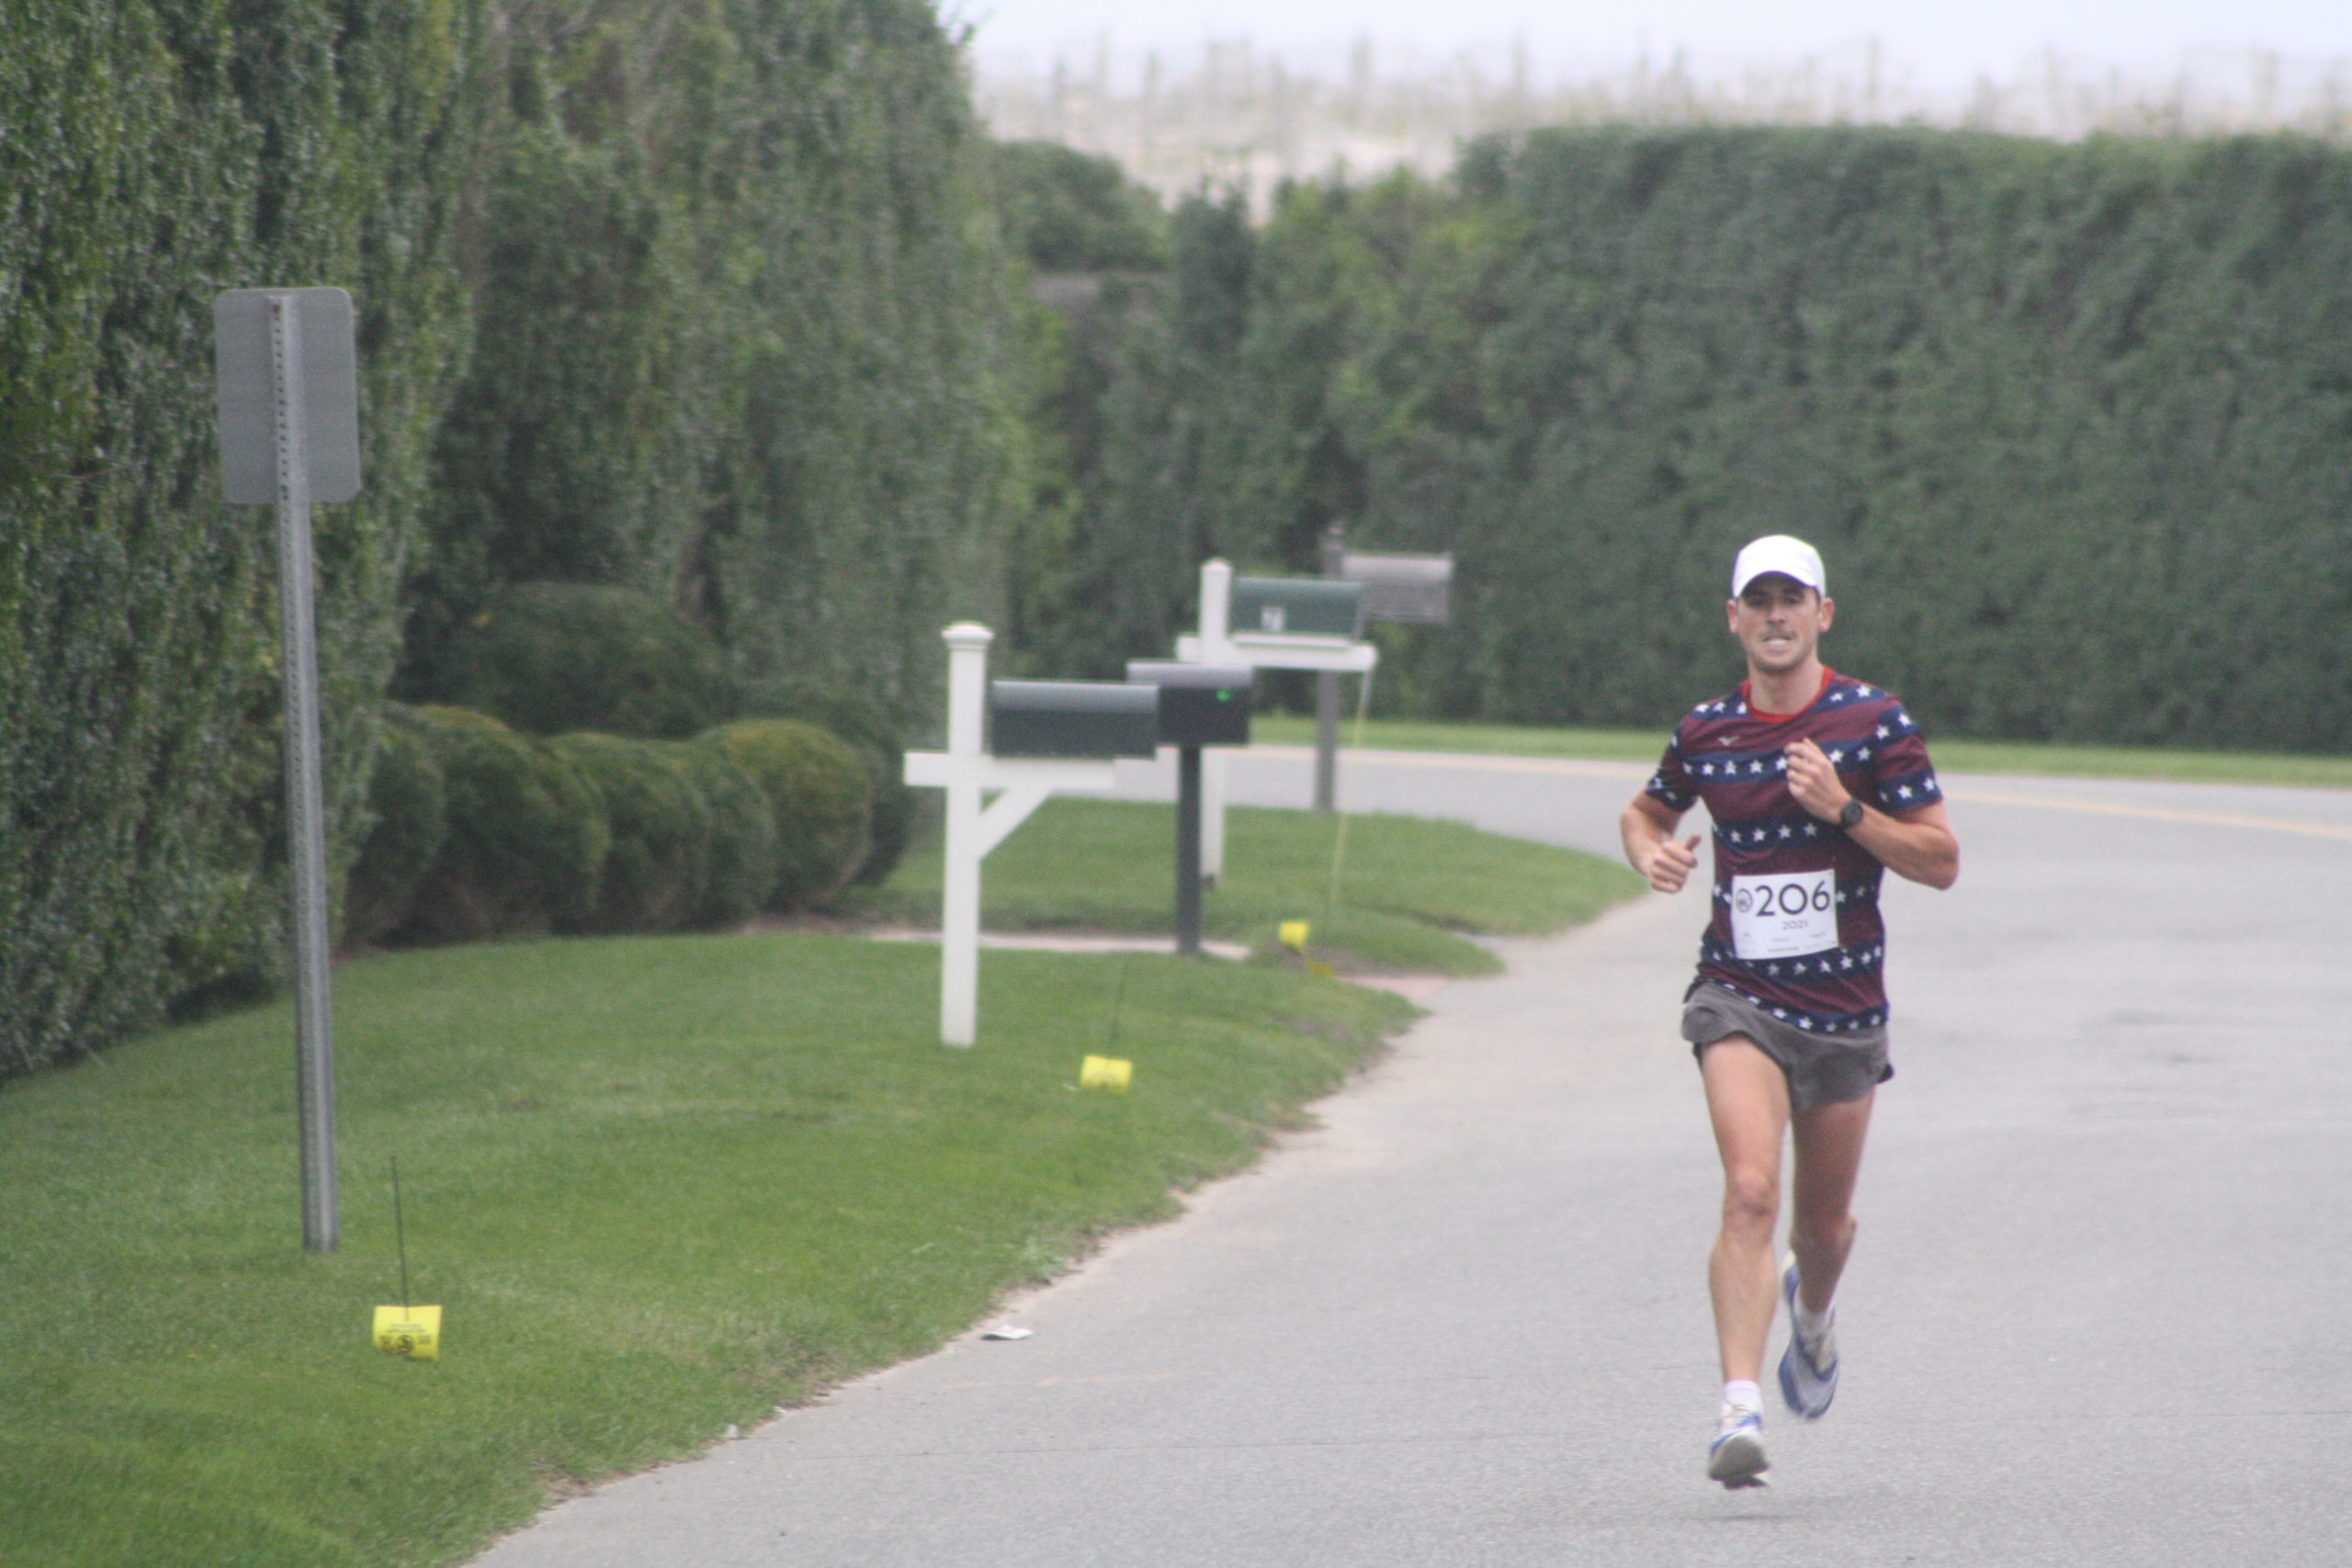 Oz Pearlman, a past winner of both the Firecracker 8K and the Hamptons Marathon, had a huge lead over the field for most of the race and won easily.